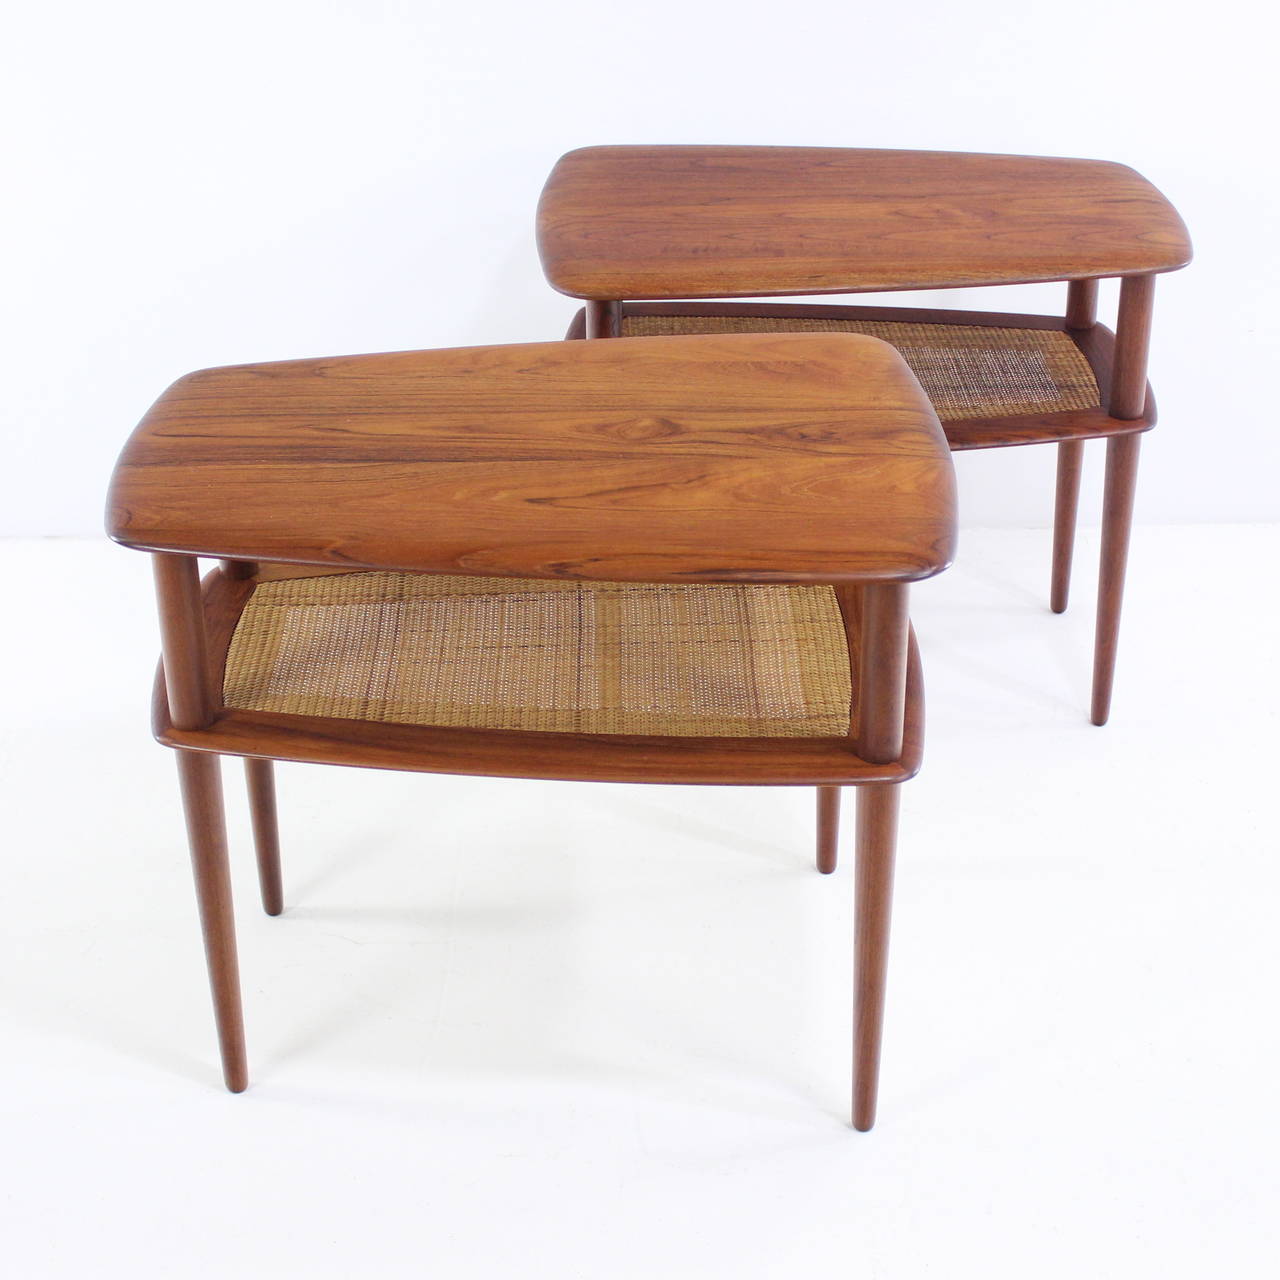 Two Danish modern end or side tables designed by Peter Hvidt.
Richly grained solid teak. Lower caned magazine shelf.
Matching round and rectangular cocktail coffee table also available.
Designed to compliment Hvidt's 